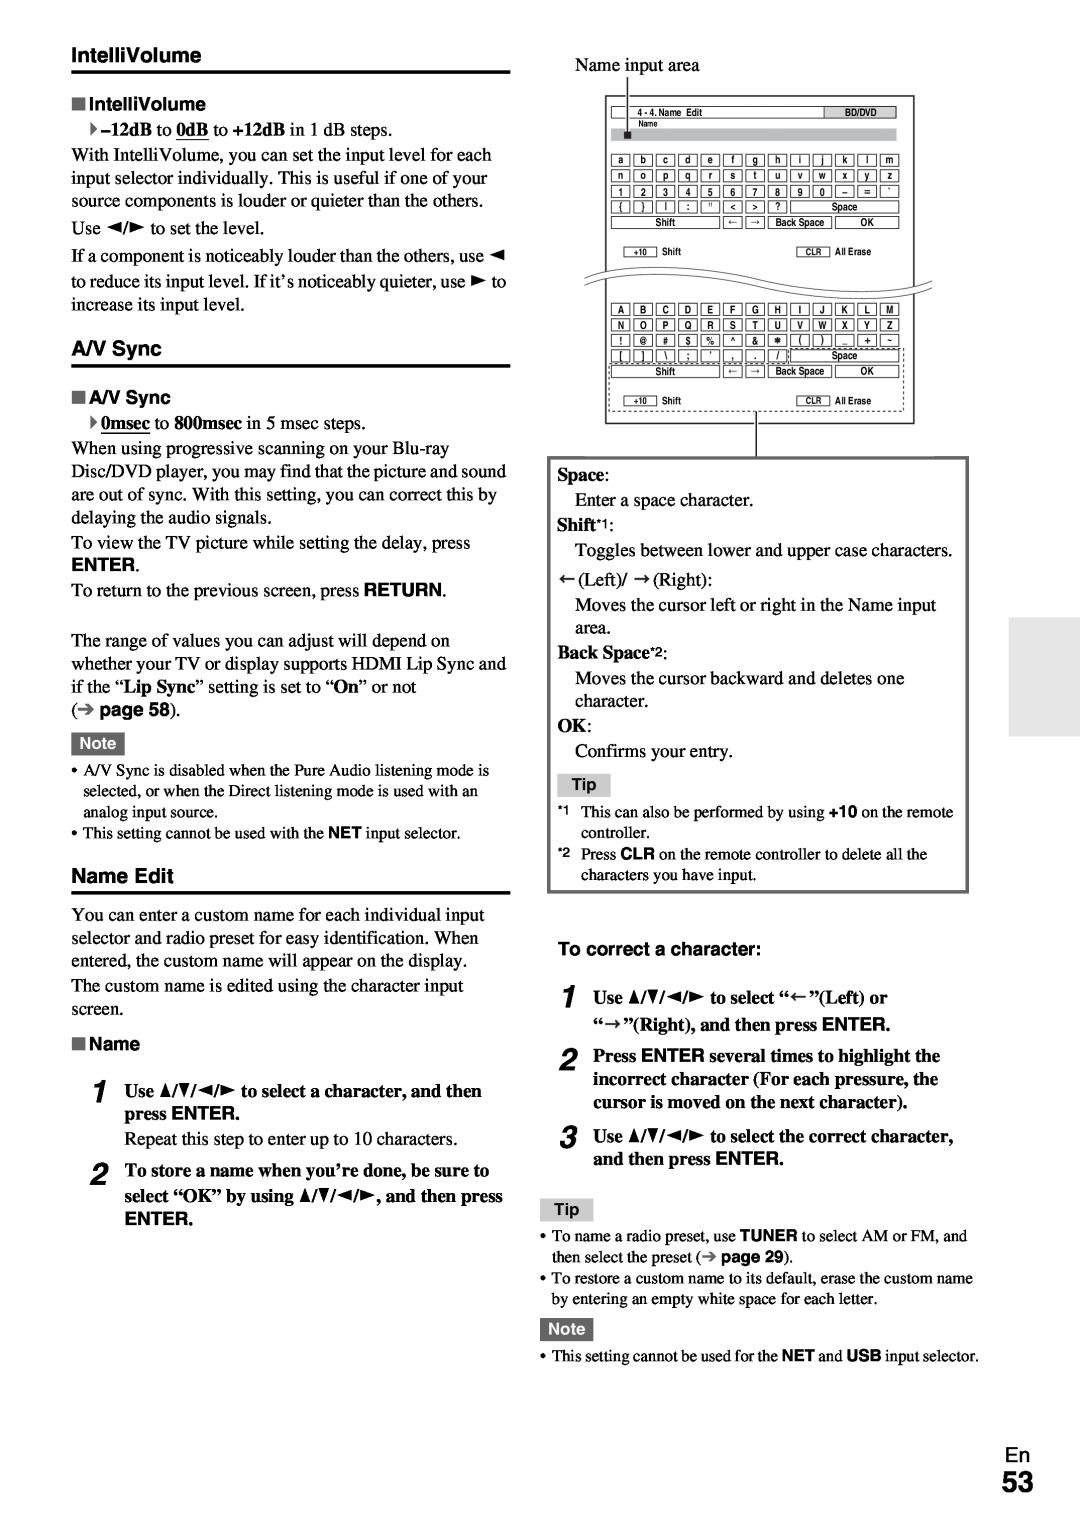 Onkyo HT-RC370 instruction manual IntelliVolume, A/V Sync, Enter, page, Name, To correct a character 